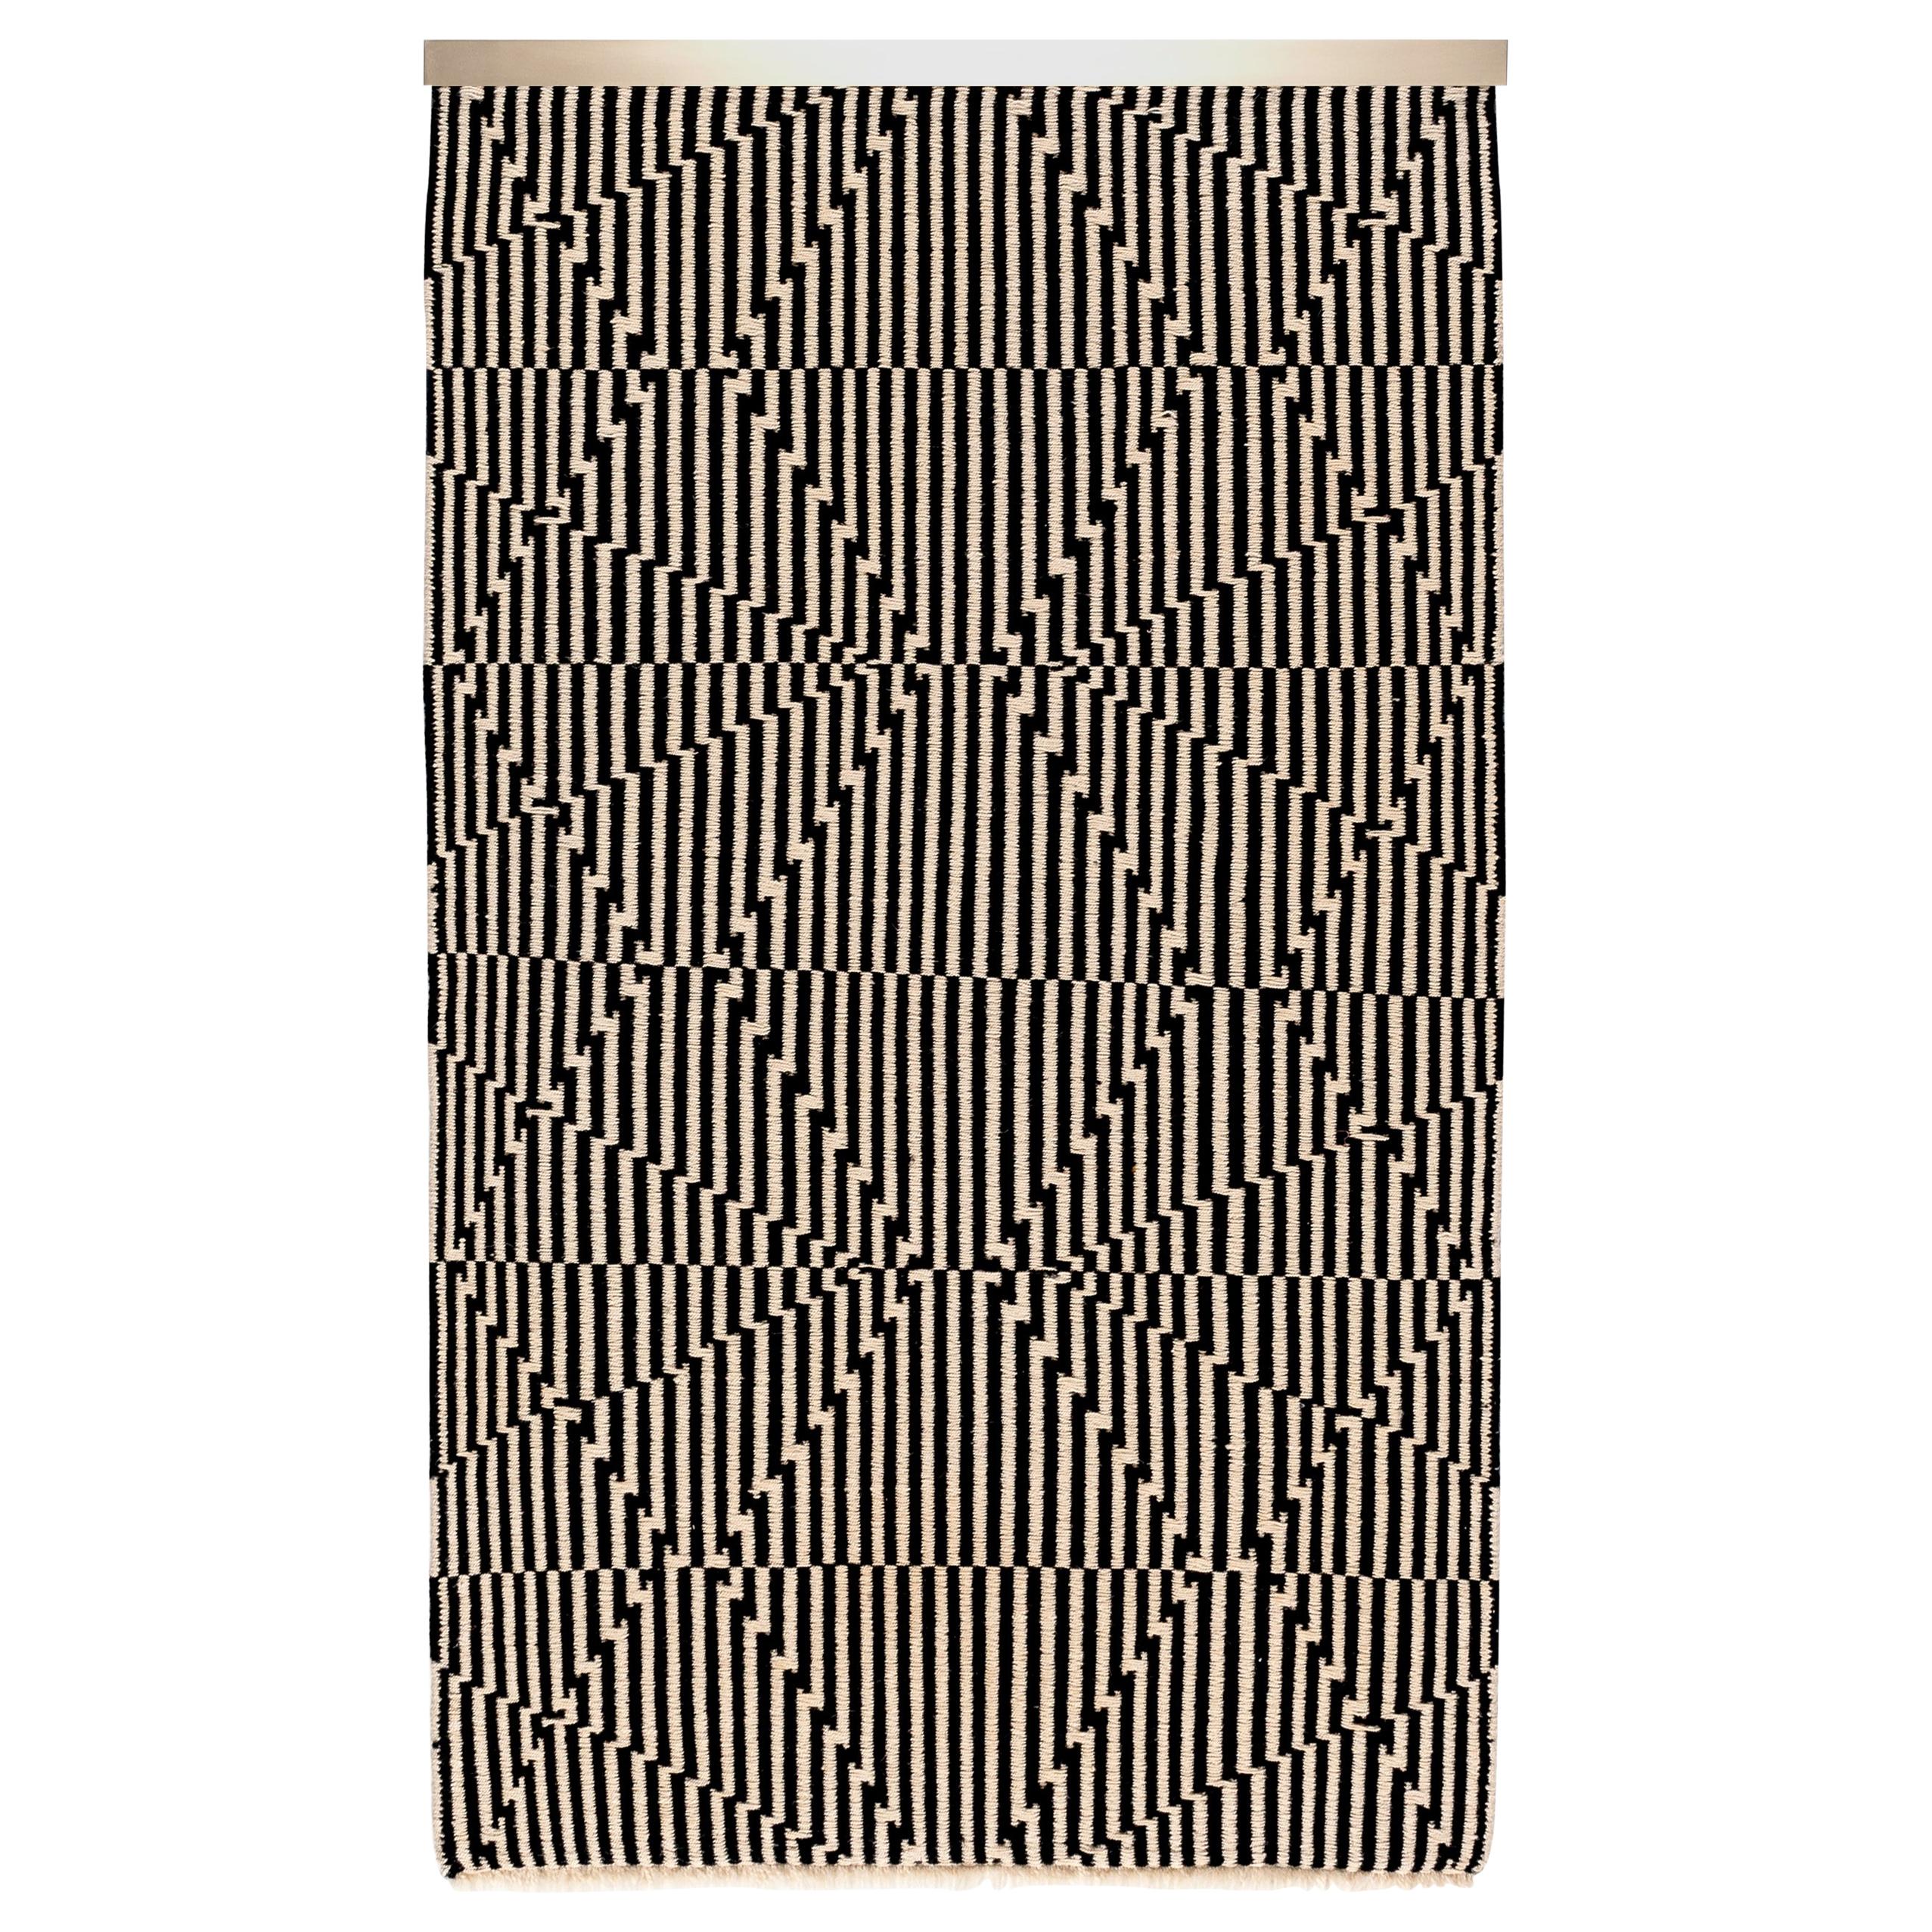 Opticals Wall Hanging Intersection Handwoven Wool in Black and White En stock